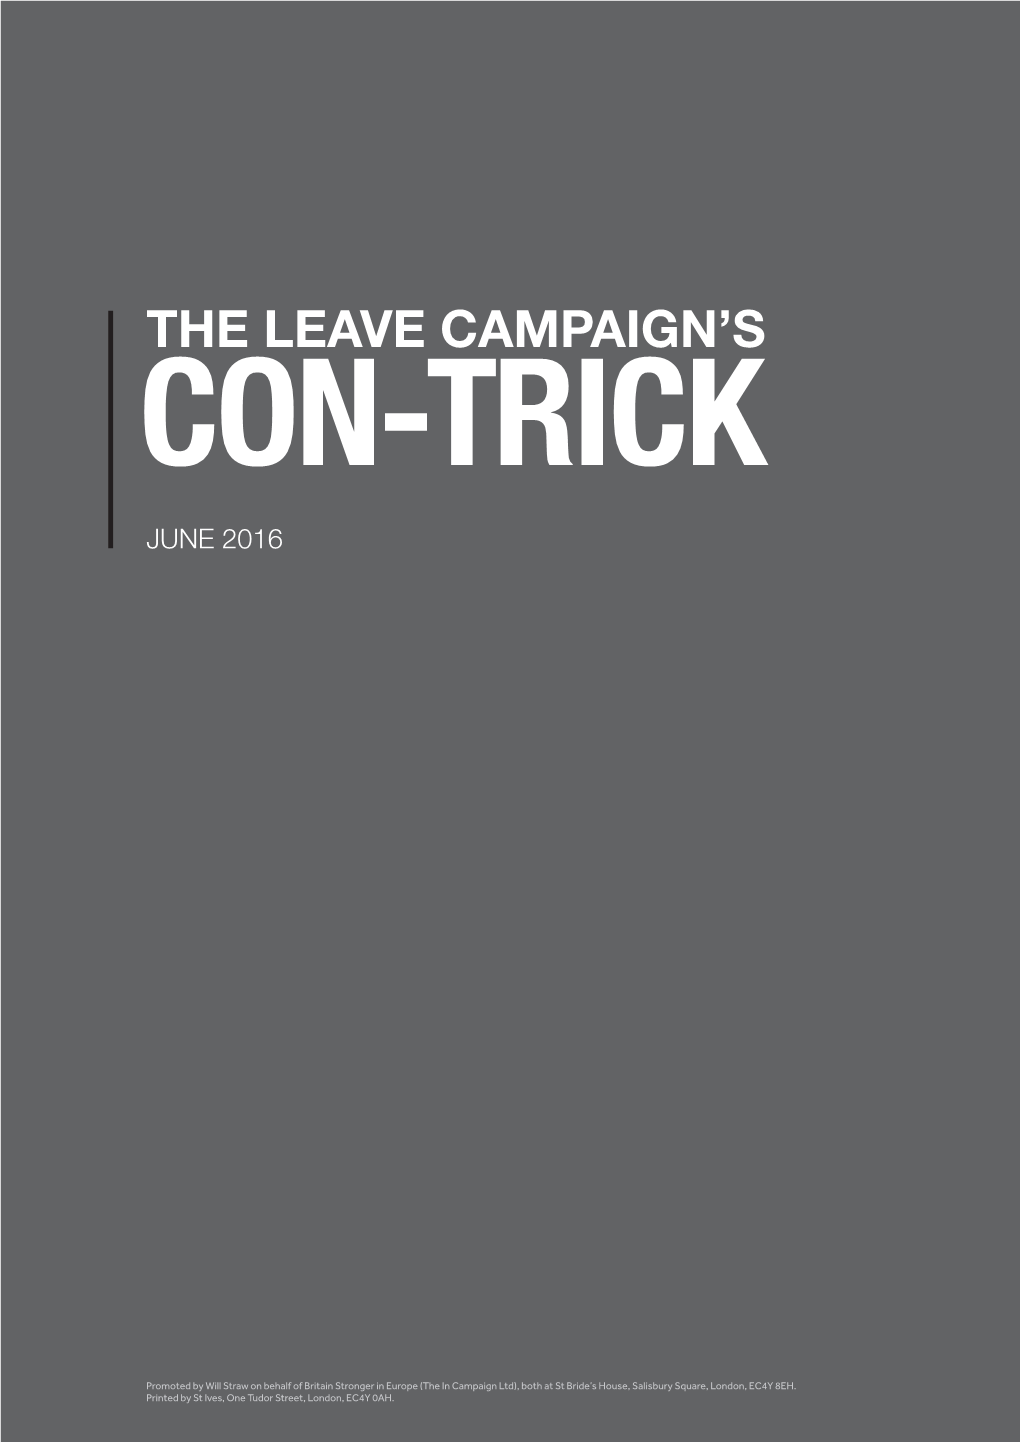 The Leave Campaign's